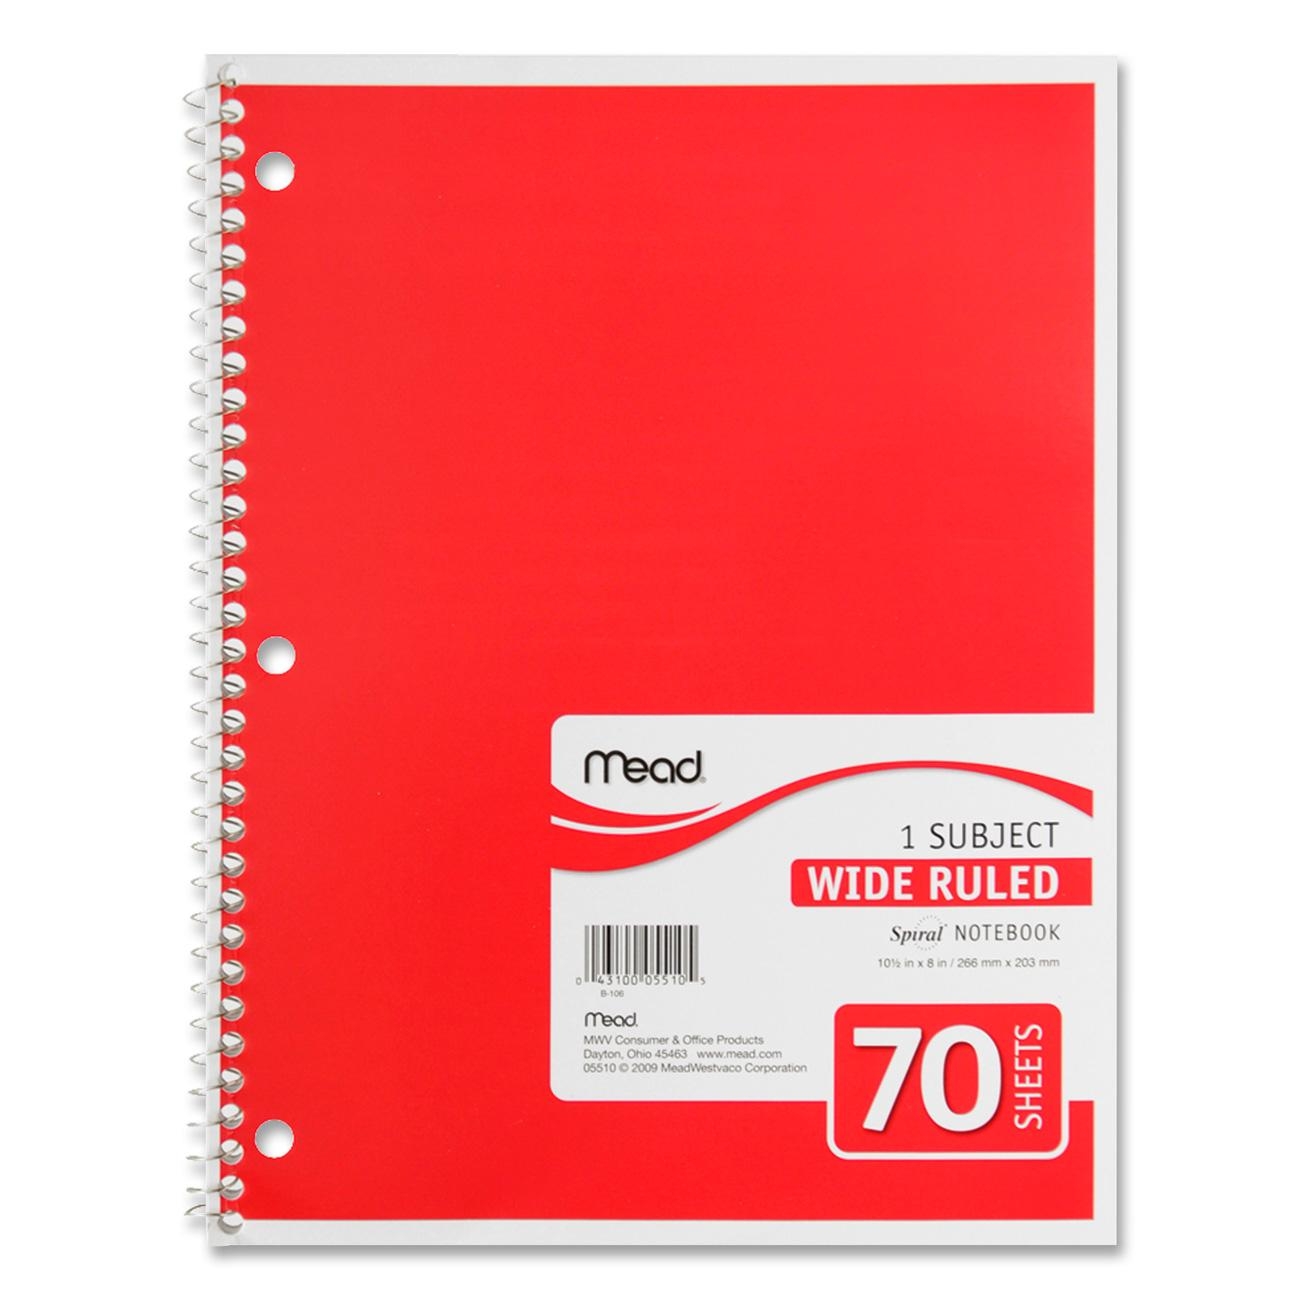 Mead Spiral Notebook, 1Subject, Wide Rule LD Products